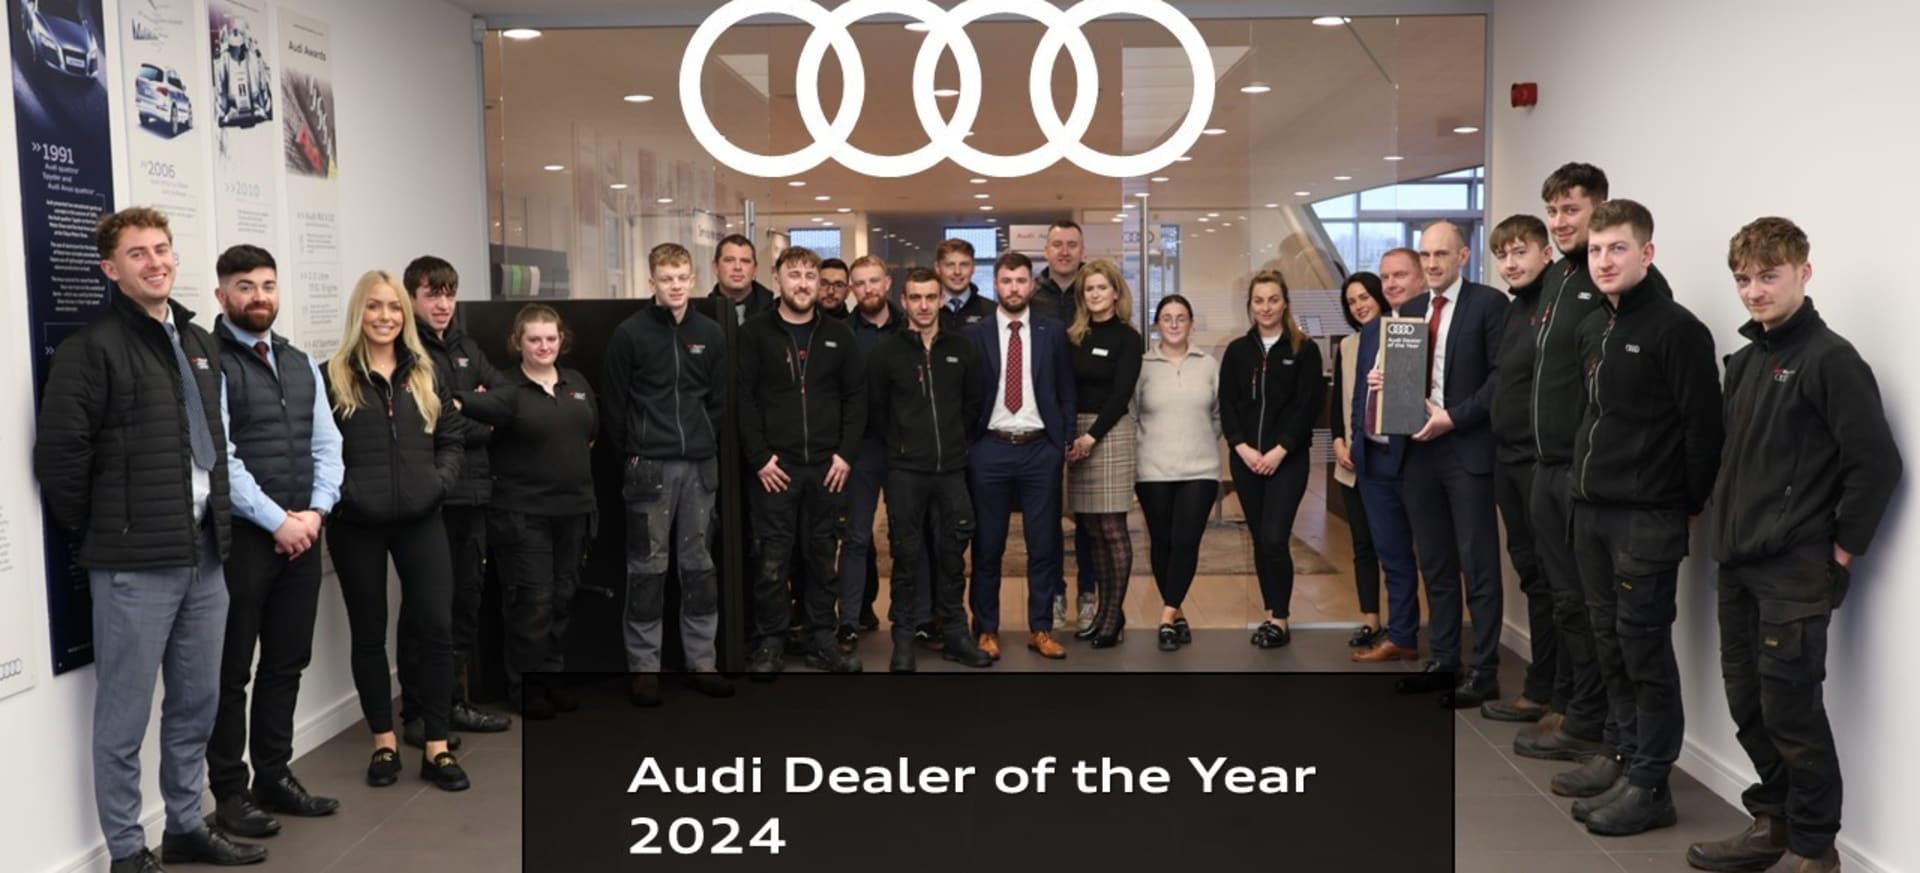 Audi Dealer of the Year 2024